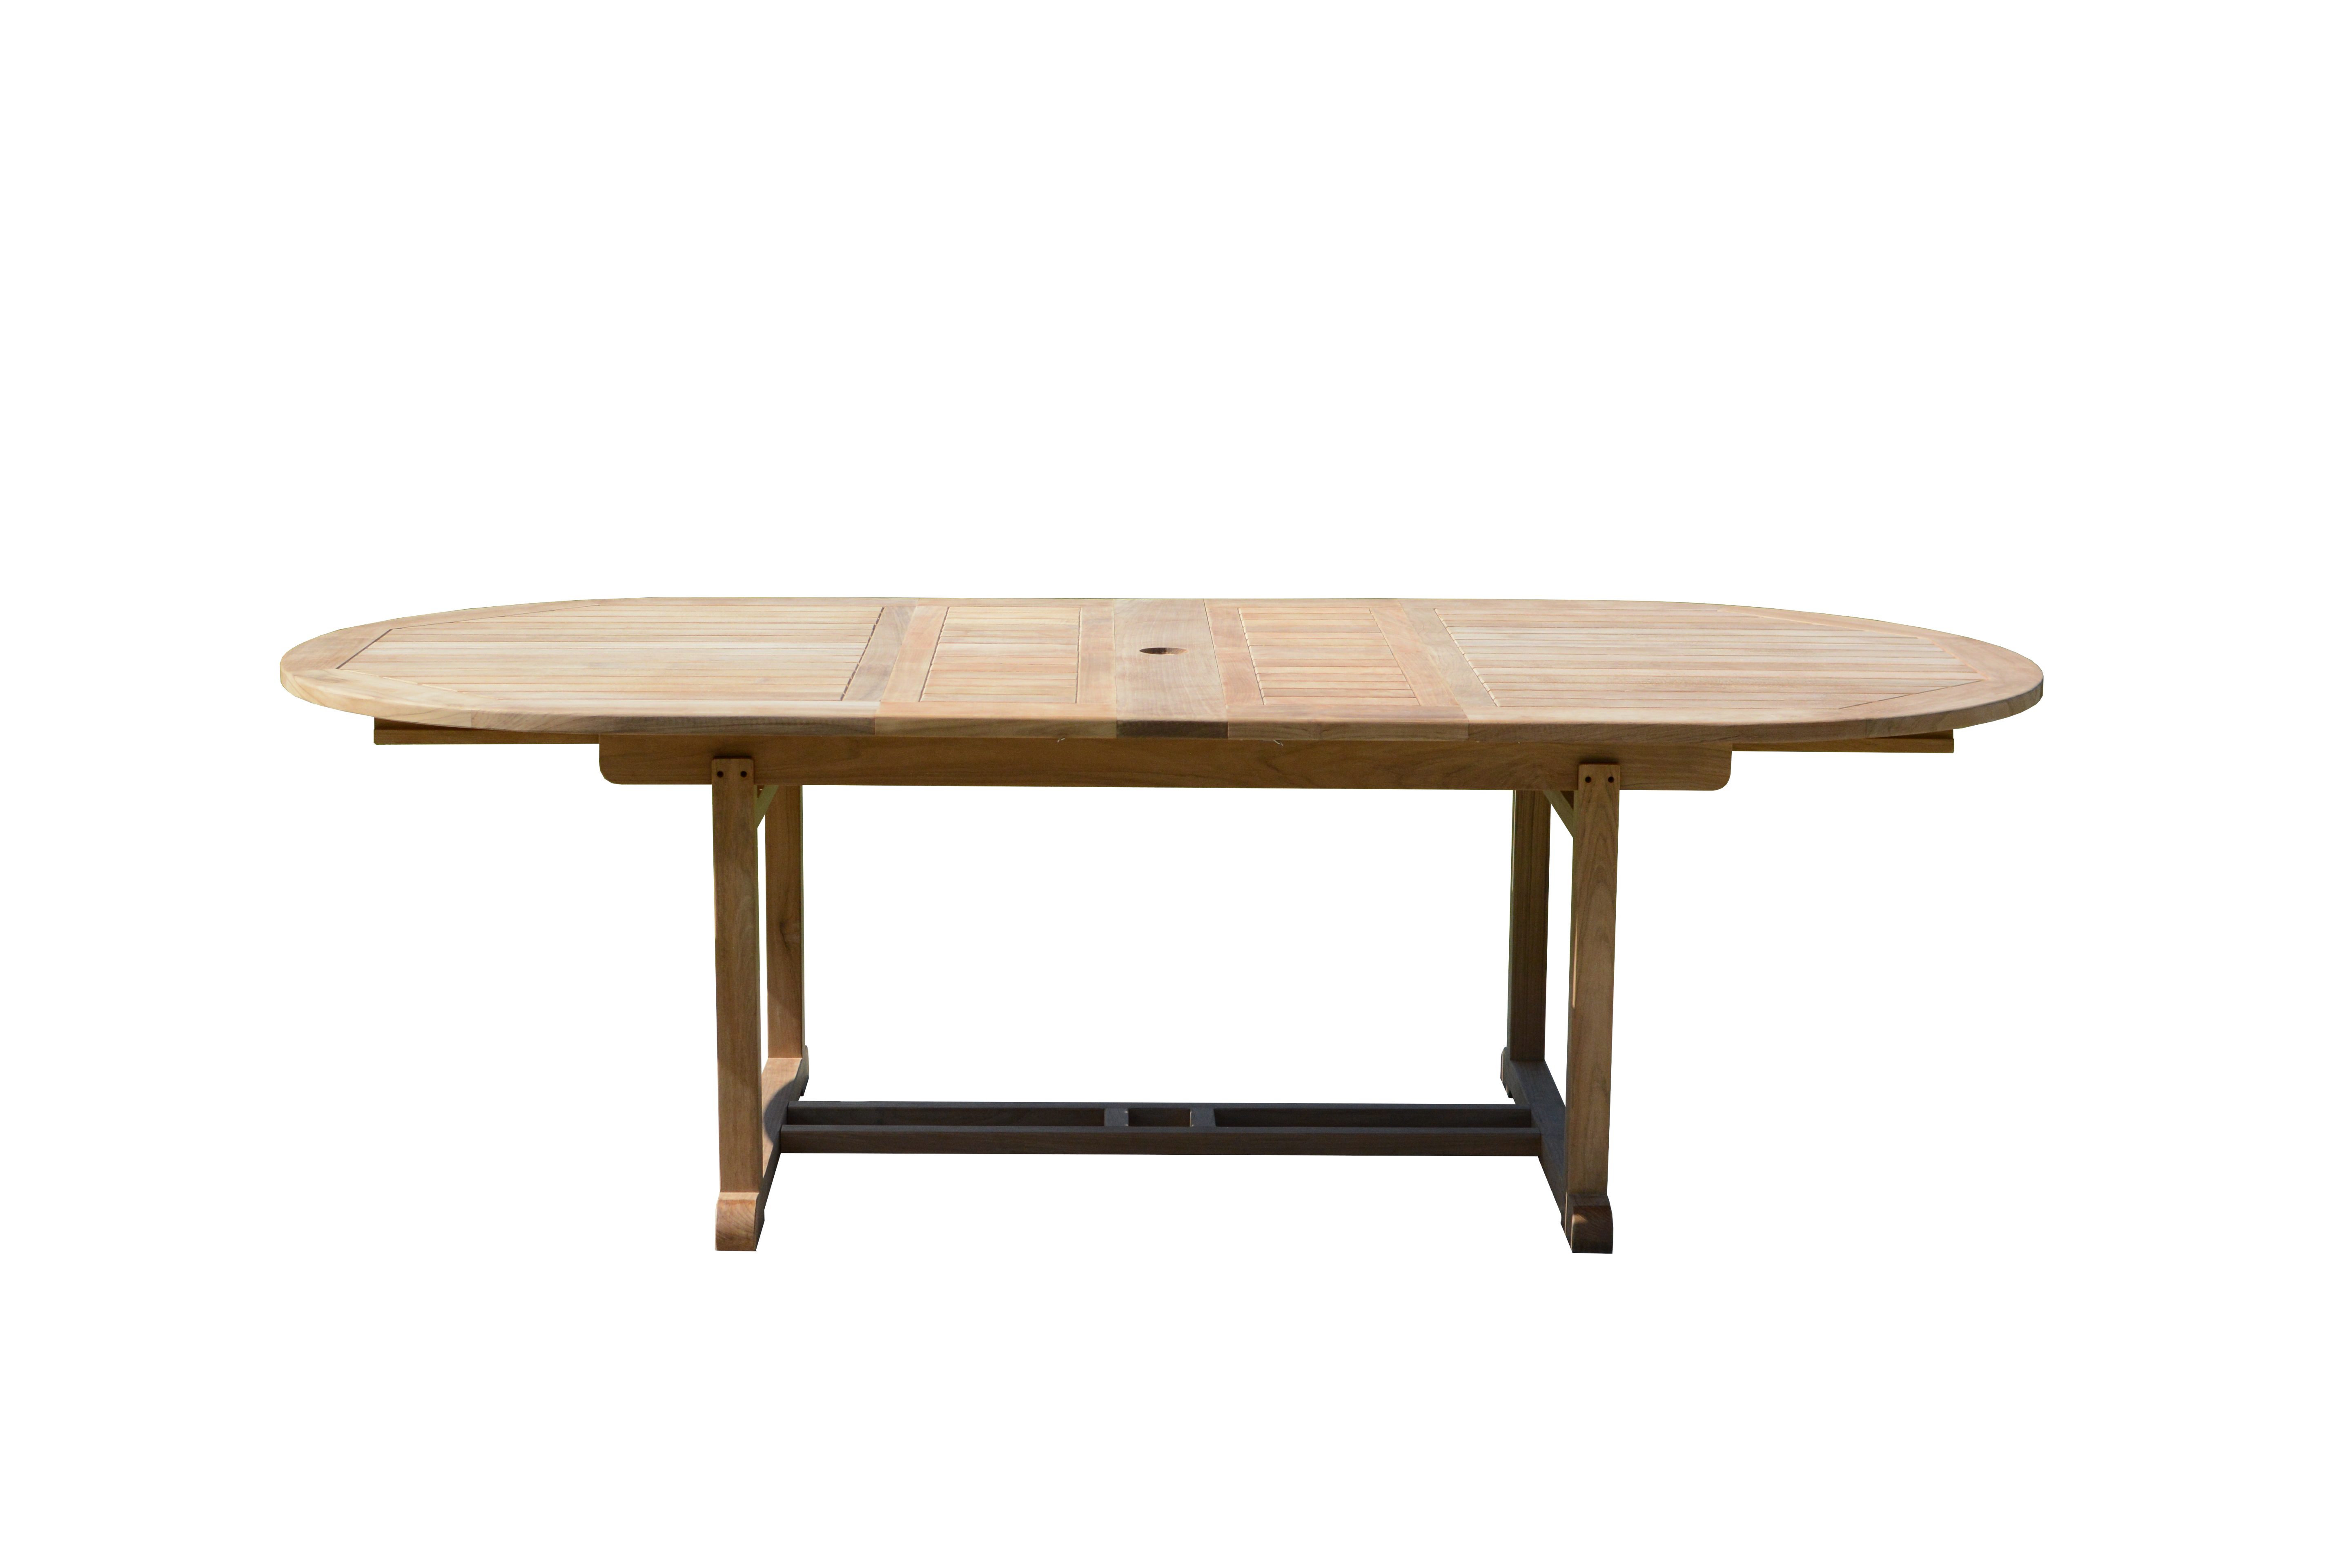 Chelsea Oval Extension Table 74" - 98"